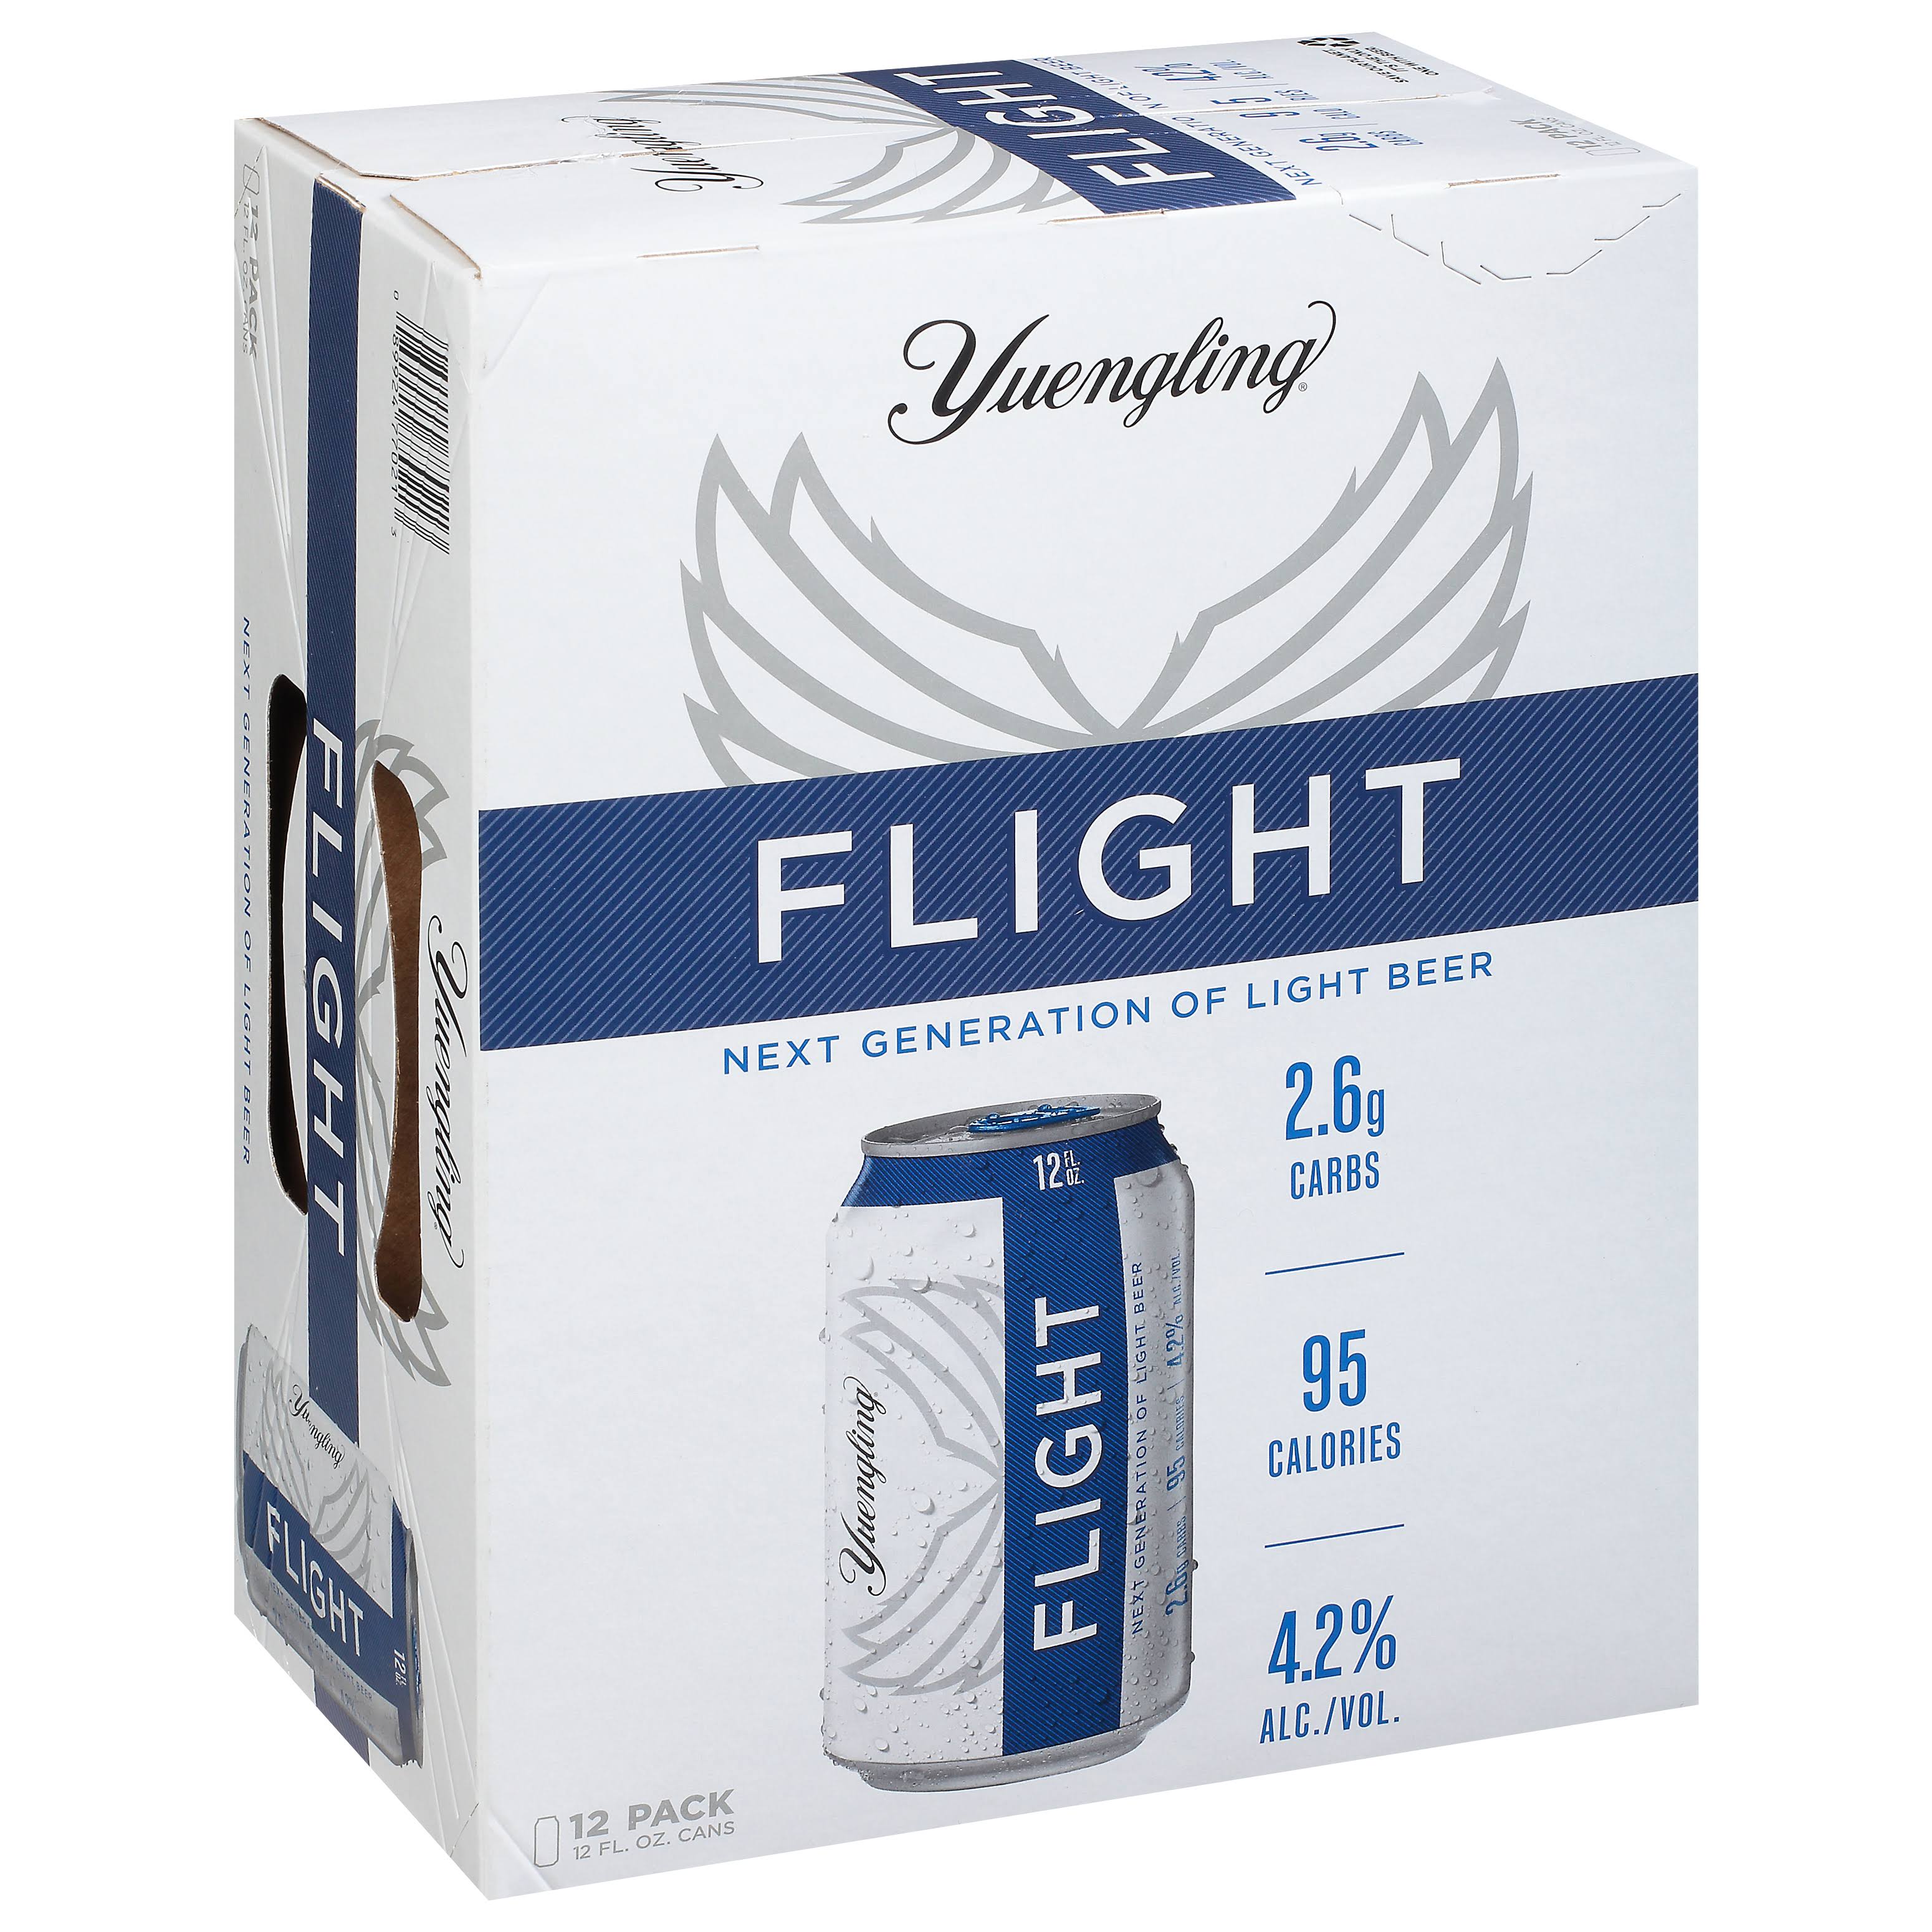 Yuengling Beer, Flight, 12 Pack - 12 pack, 12 fl oz cans